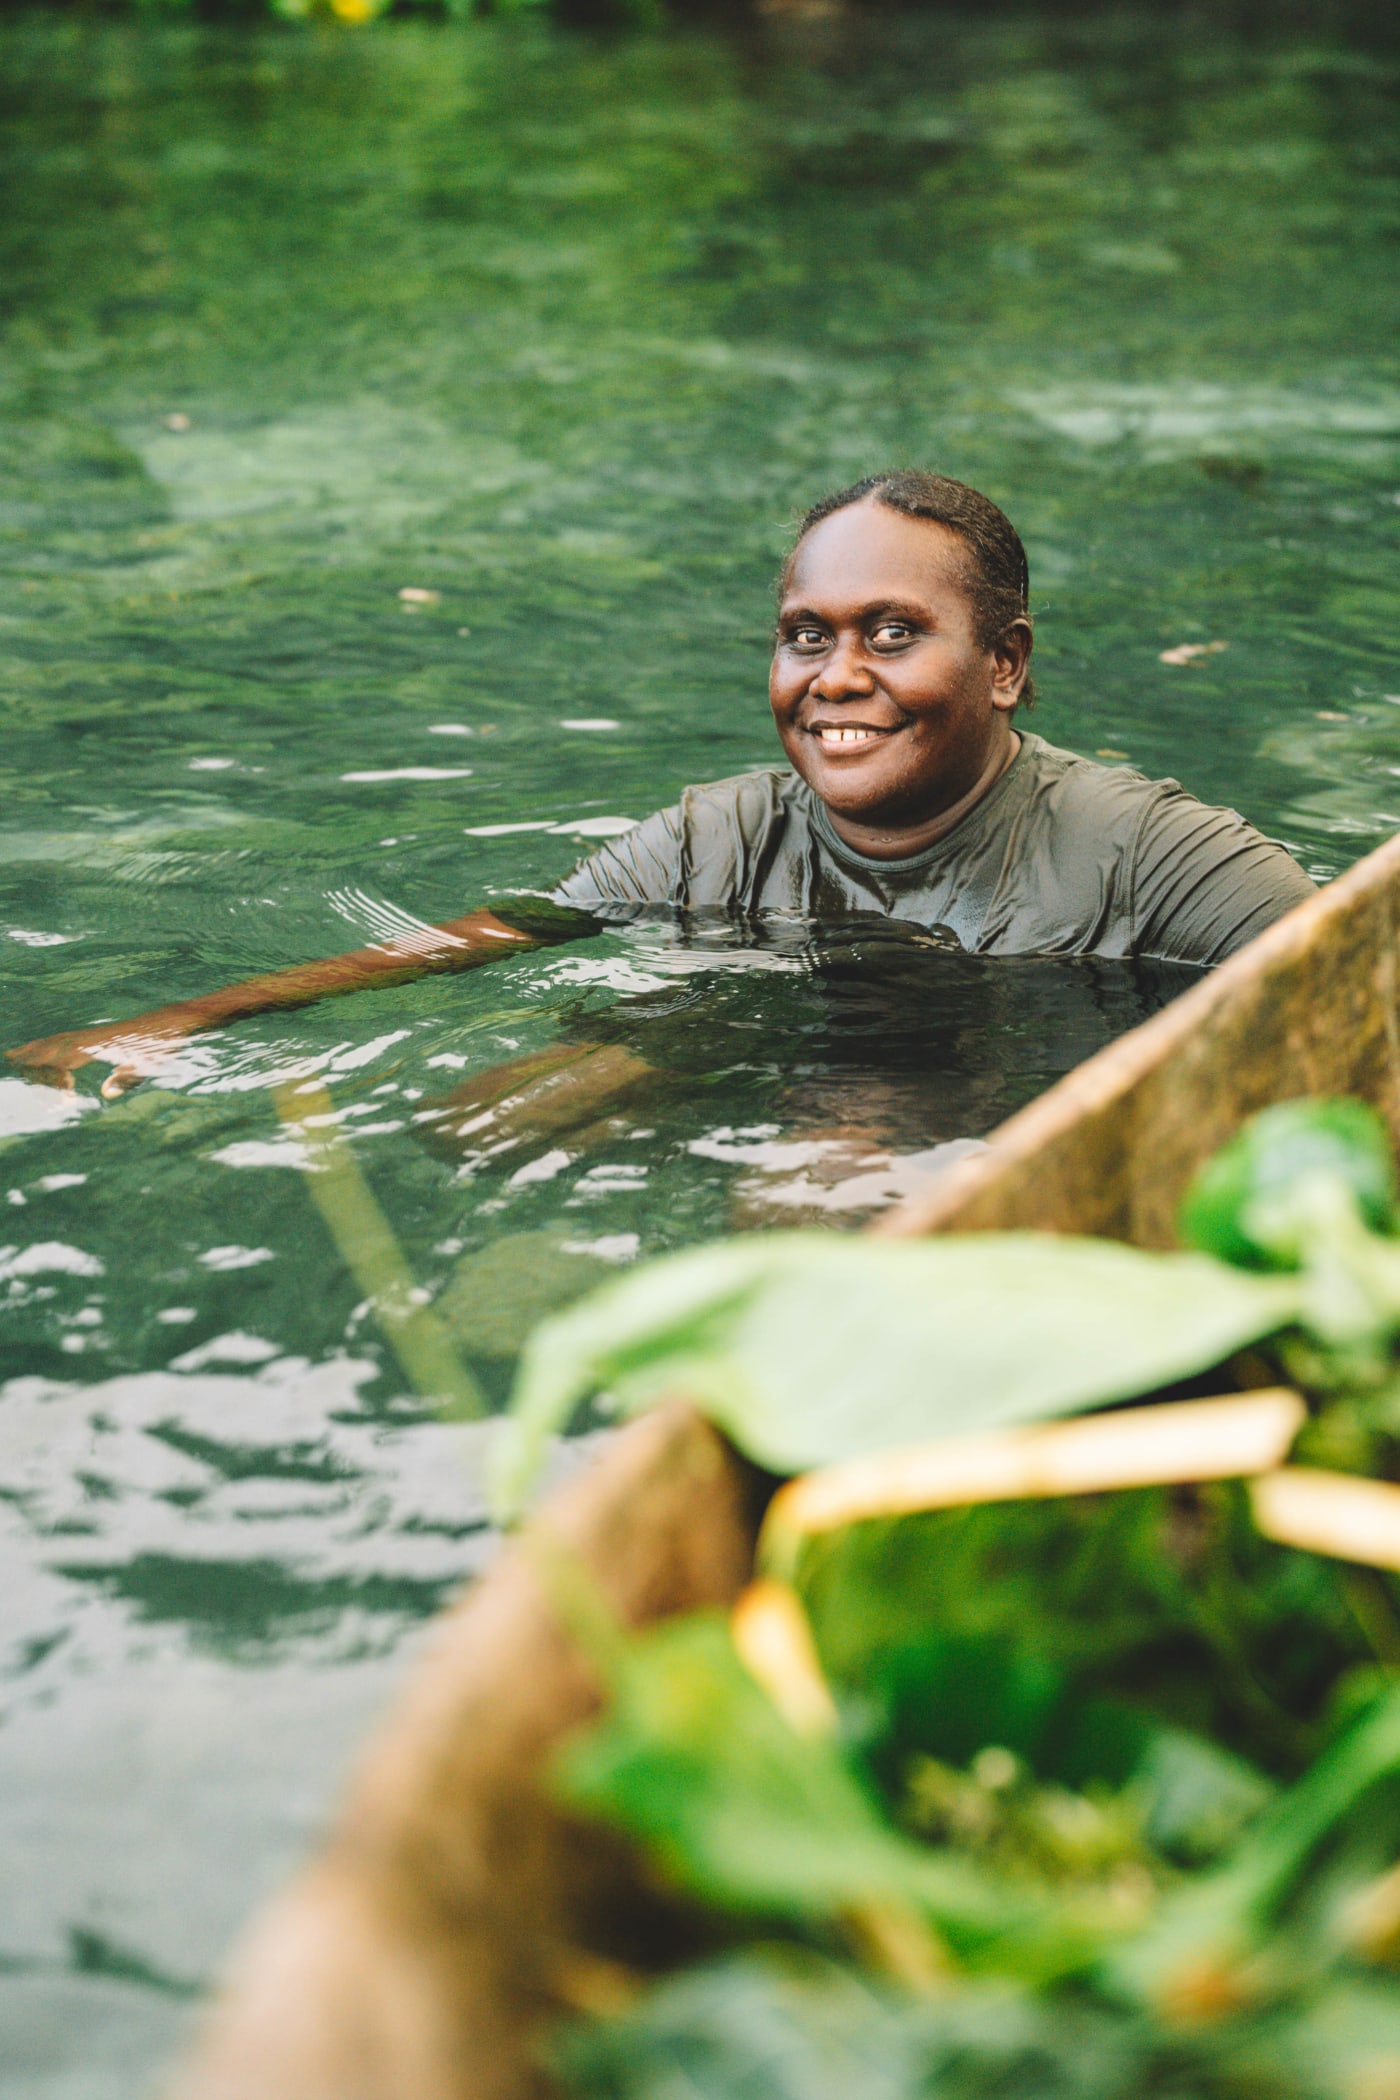 Salome, WWF-Pacific joining harvester to collect sea grapes